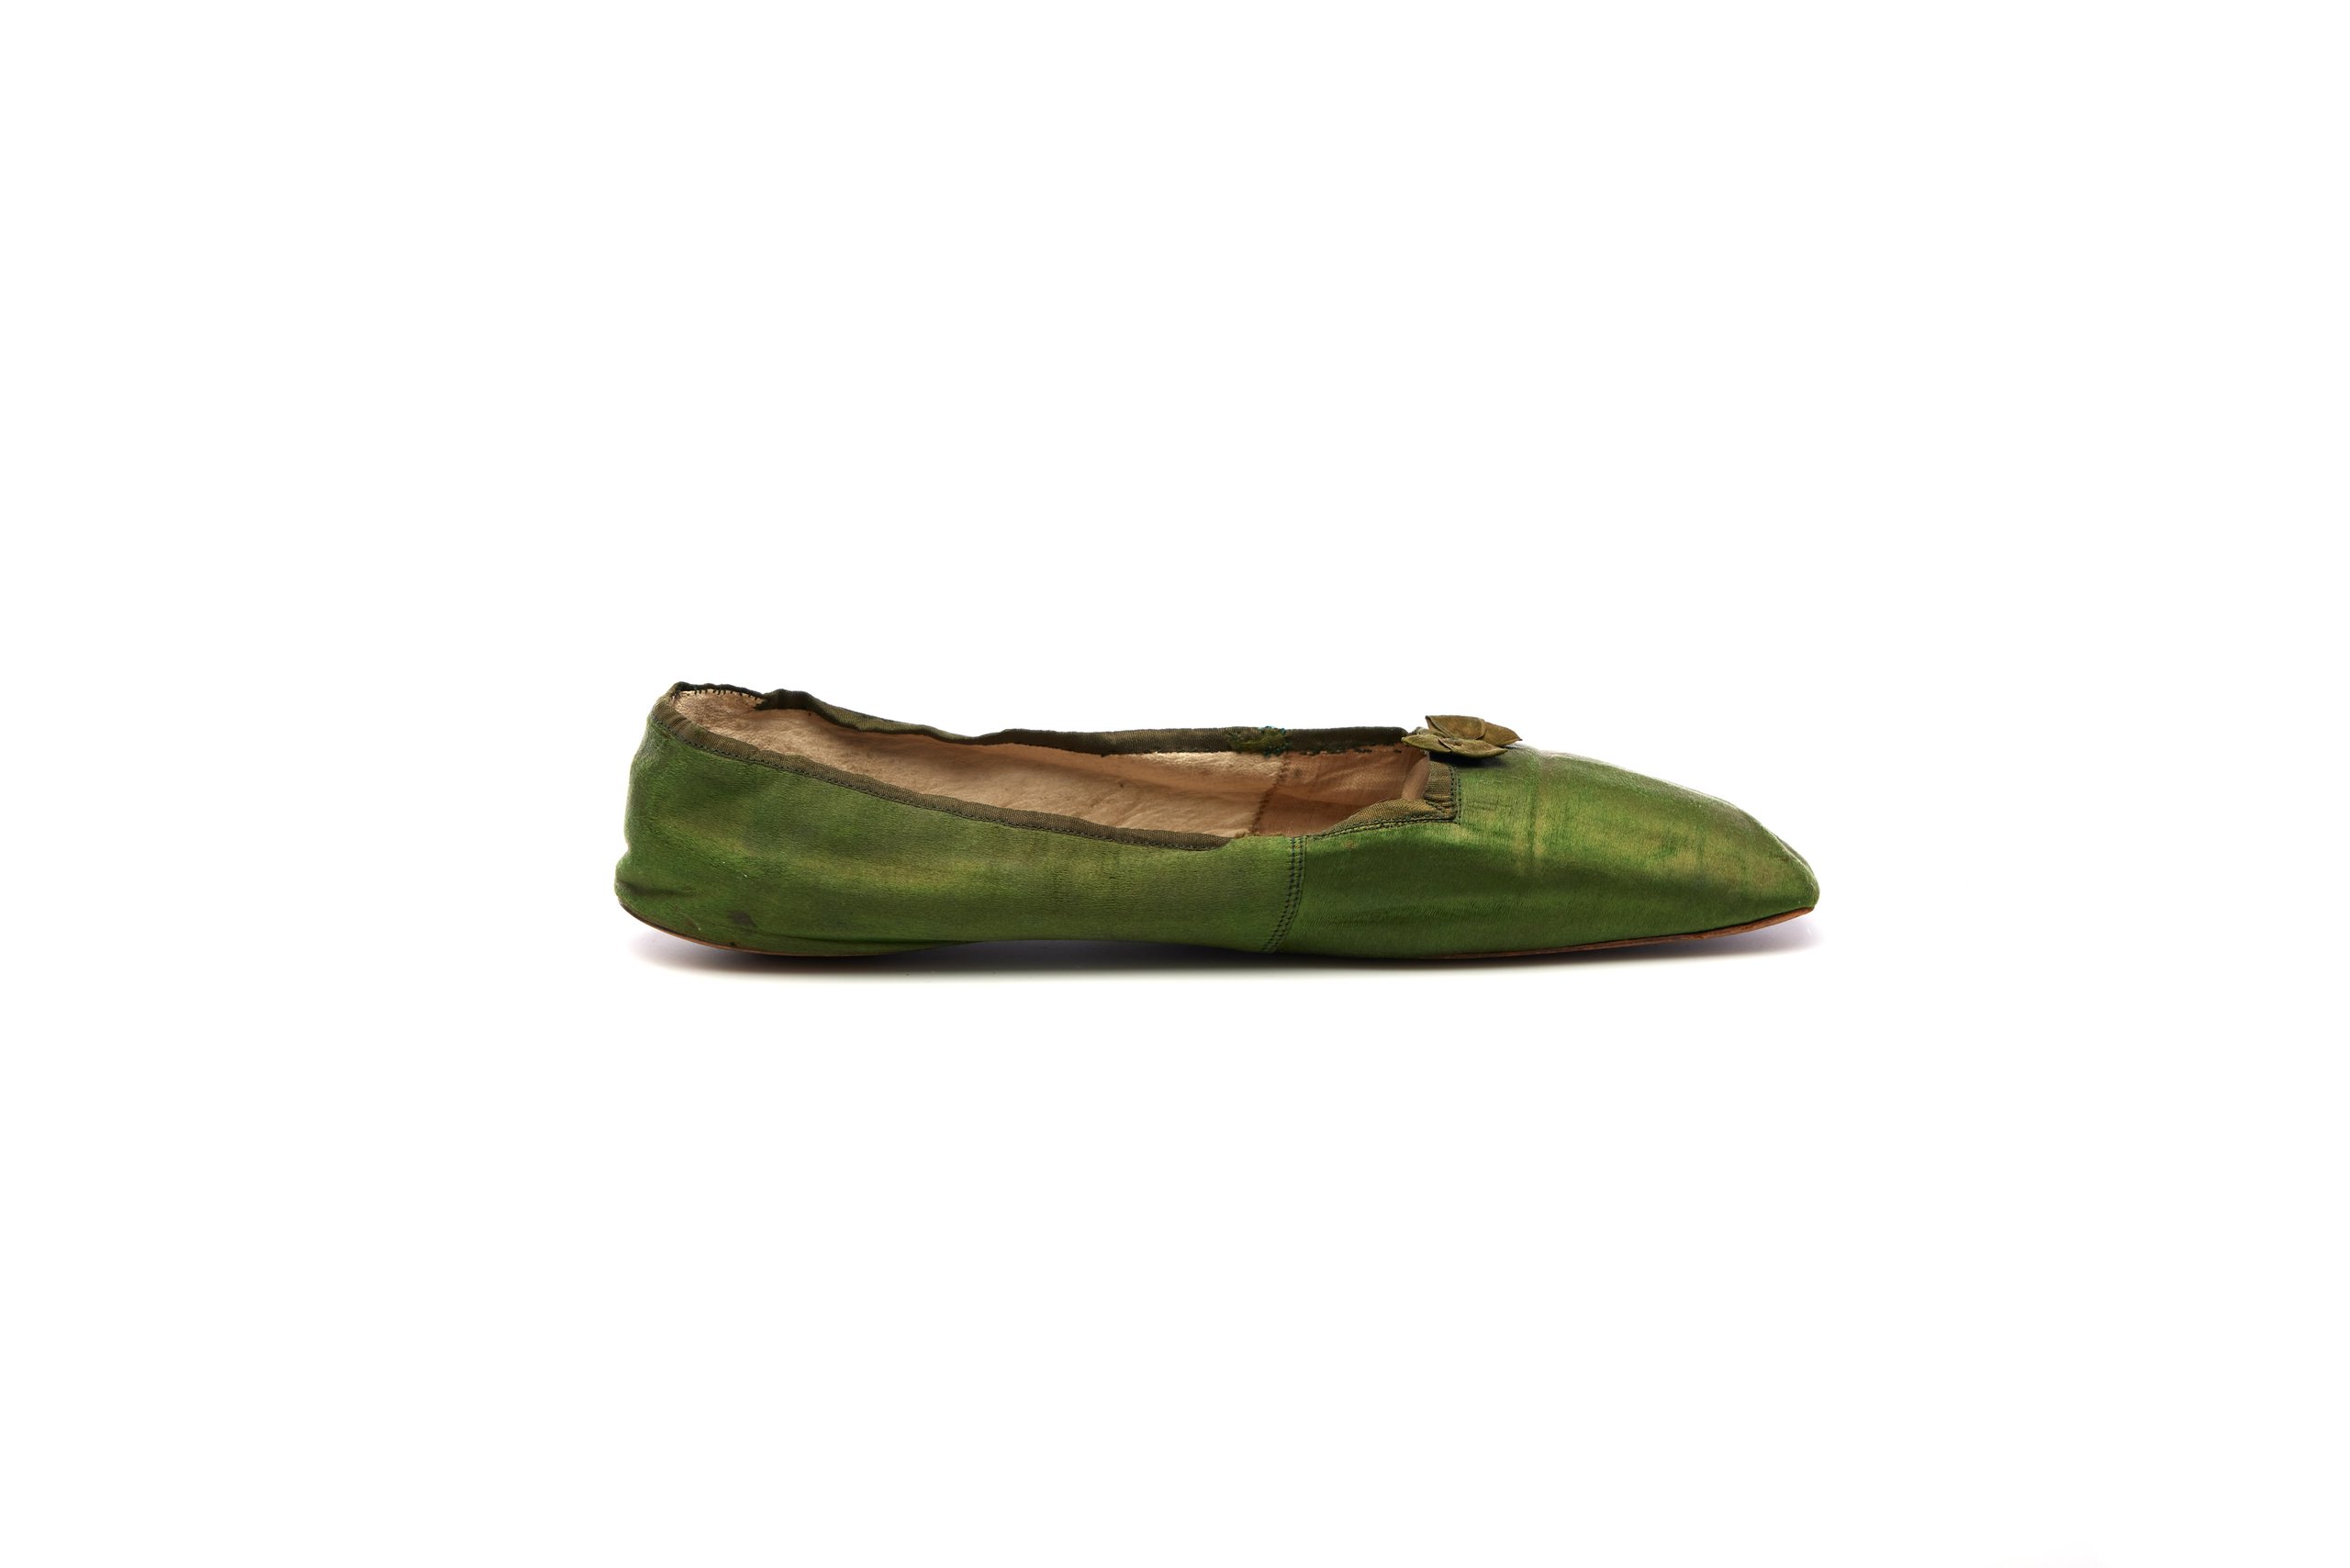 Pair of slip on shoes by Gundry & Sons